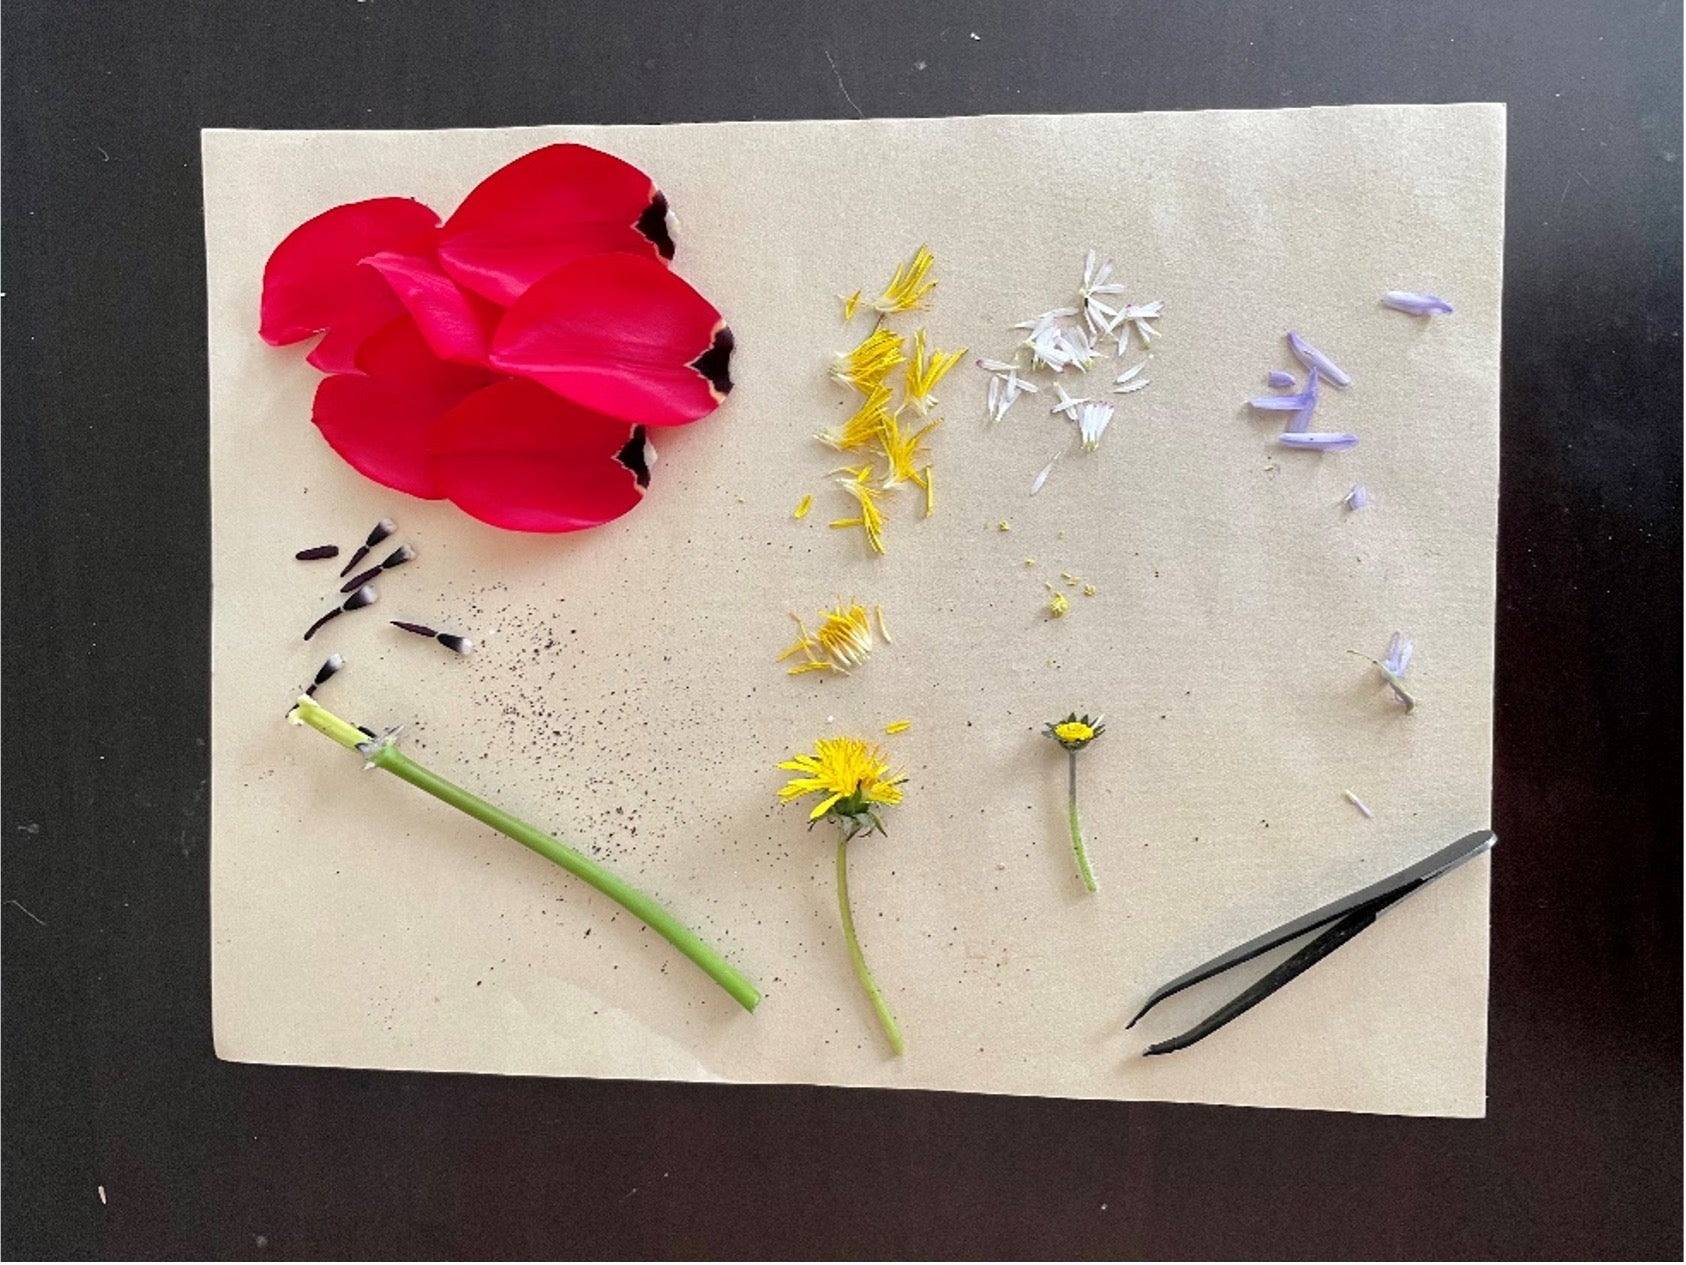 Flower dissection activity 